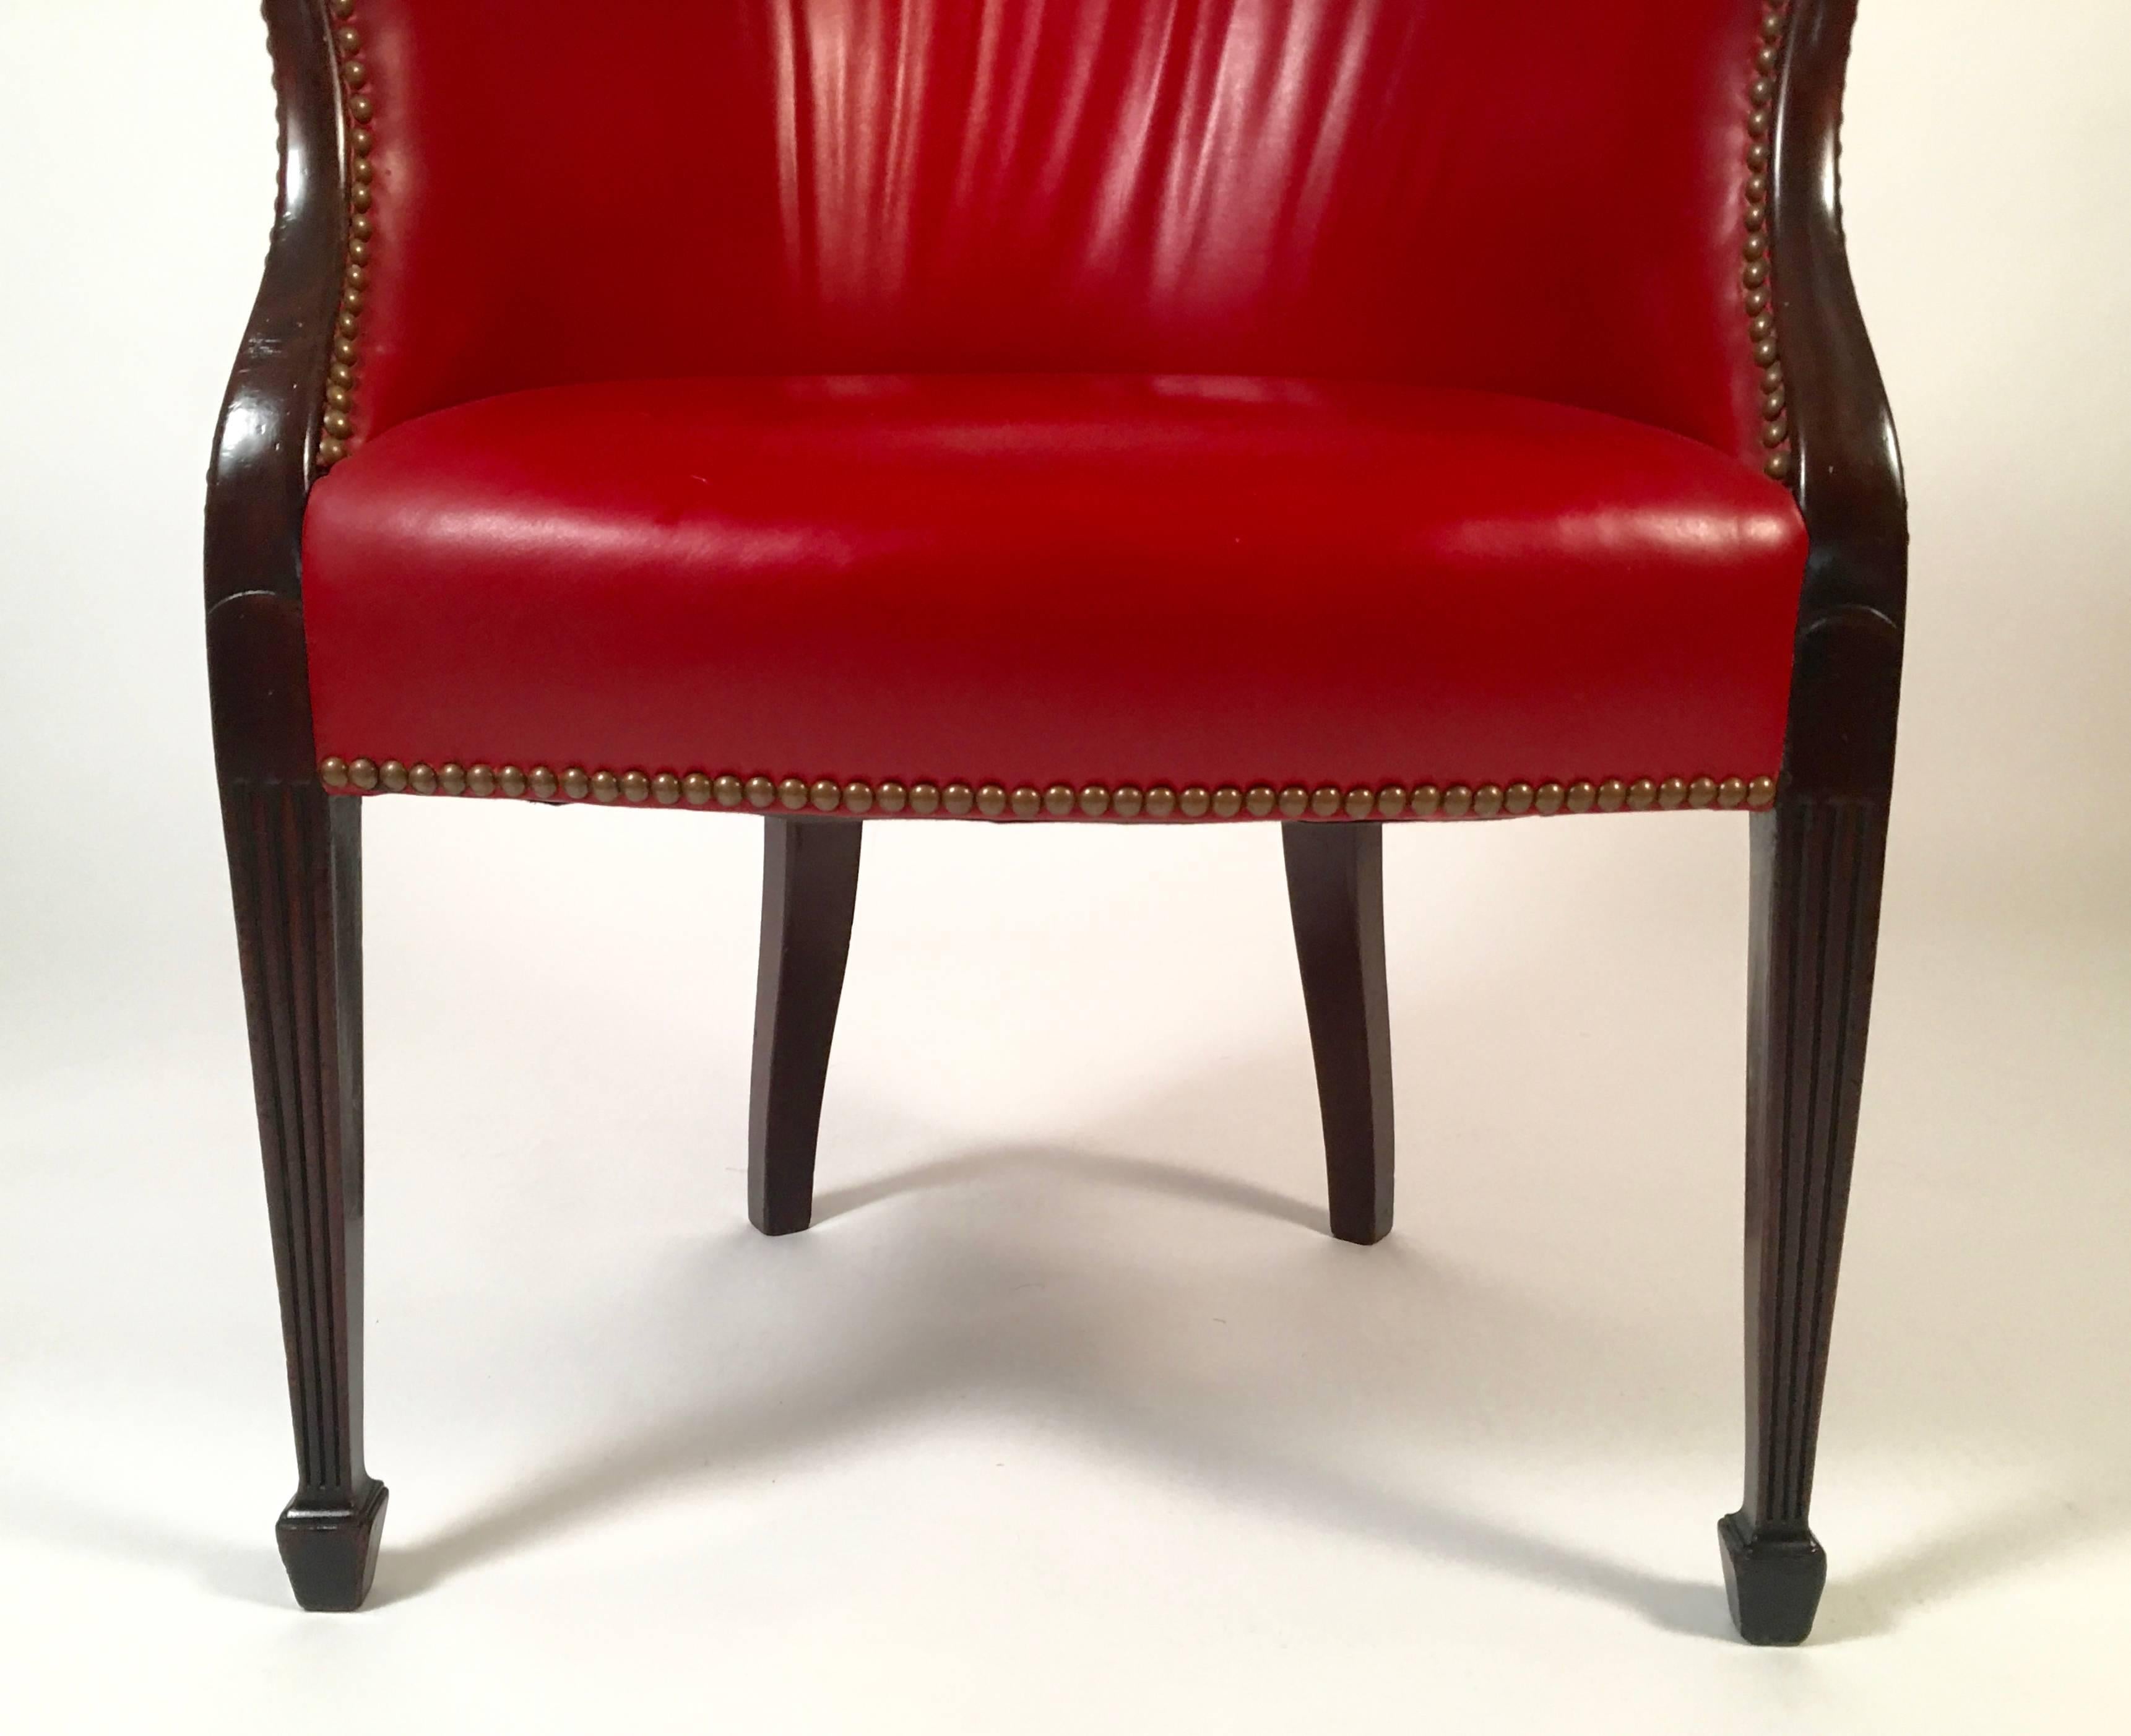 Late 18th Century Hepplewhite Red Leather Barrel Back Armchair